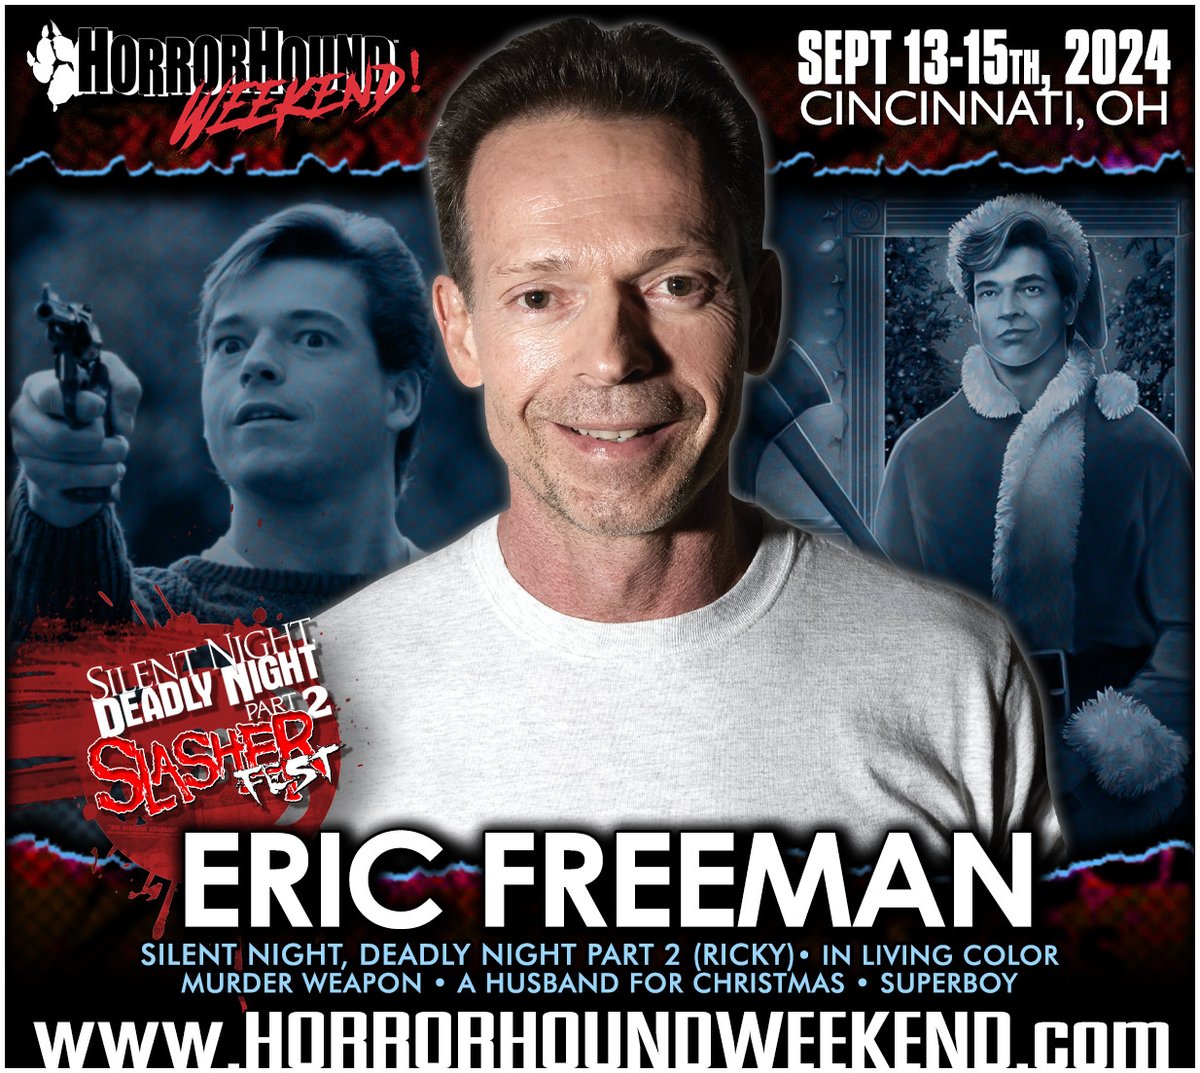 HorrorHound Weekend Cincinnati • September 13-15th, 2024 • EARLY BIRD Tickets now available @ horrorhoundweekend.com!

We are happy to announce the addition of Eric Freeman to the guest list!

#Slasher #SlasherFest #Christmas #silentnight #horror #Cincinnati #Maskfest